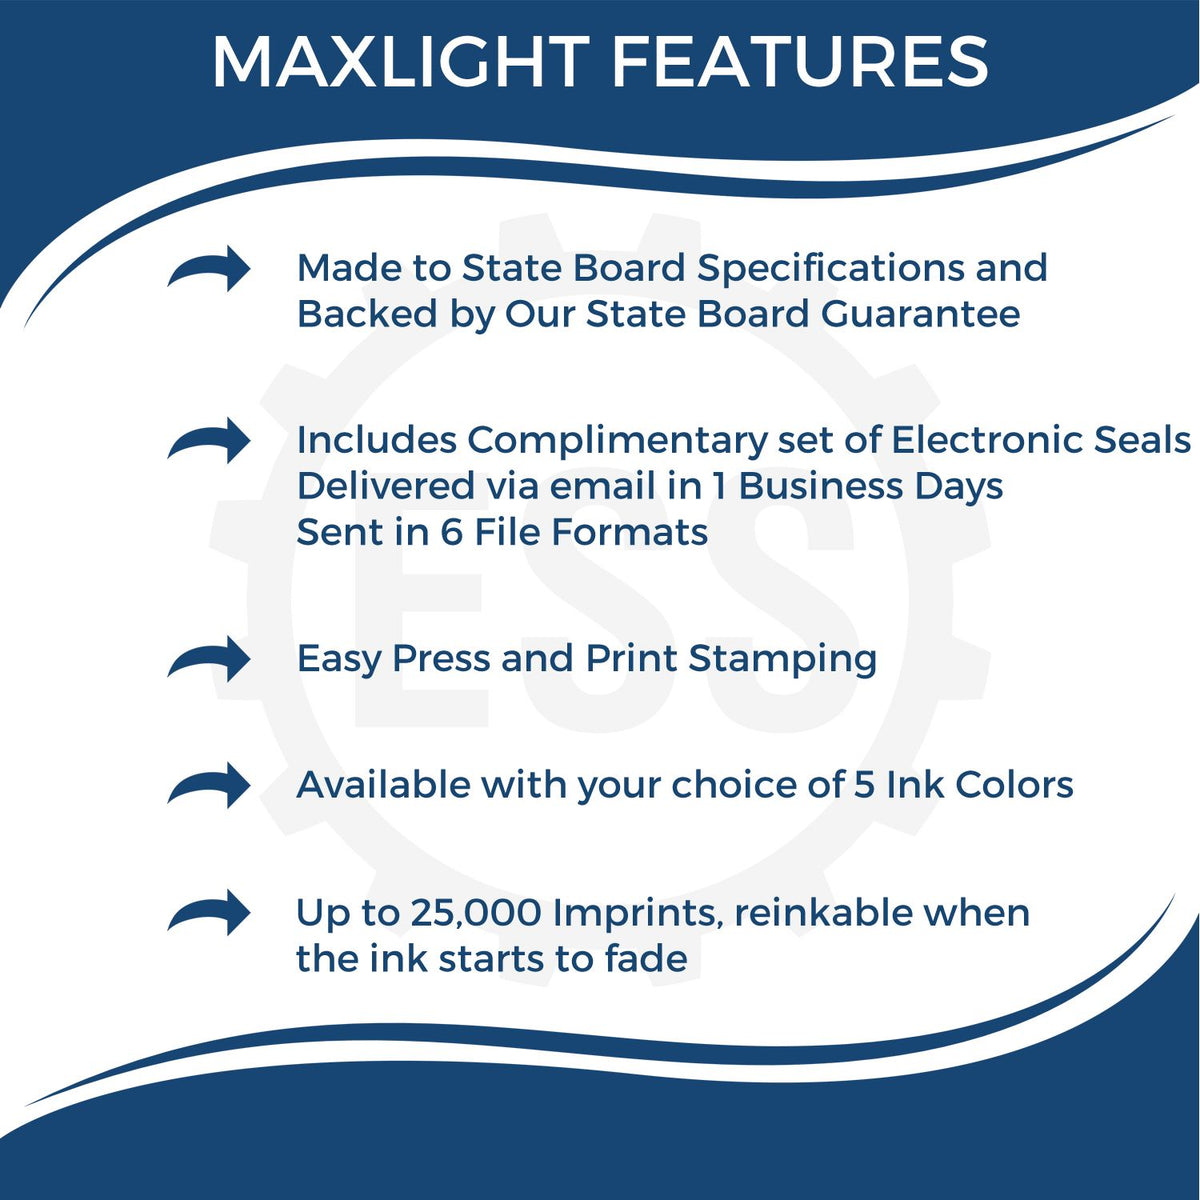 A picture of an infographic highlighting the selling points for the Premium MaxLight Pre-Inked Idaho Geology Stamp